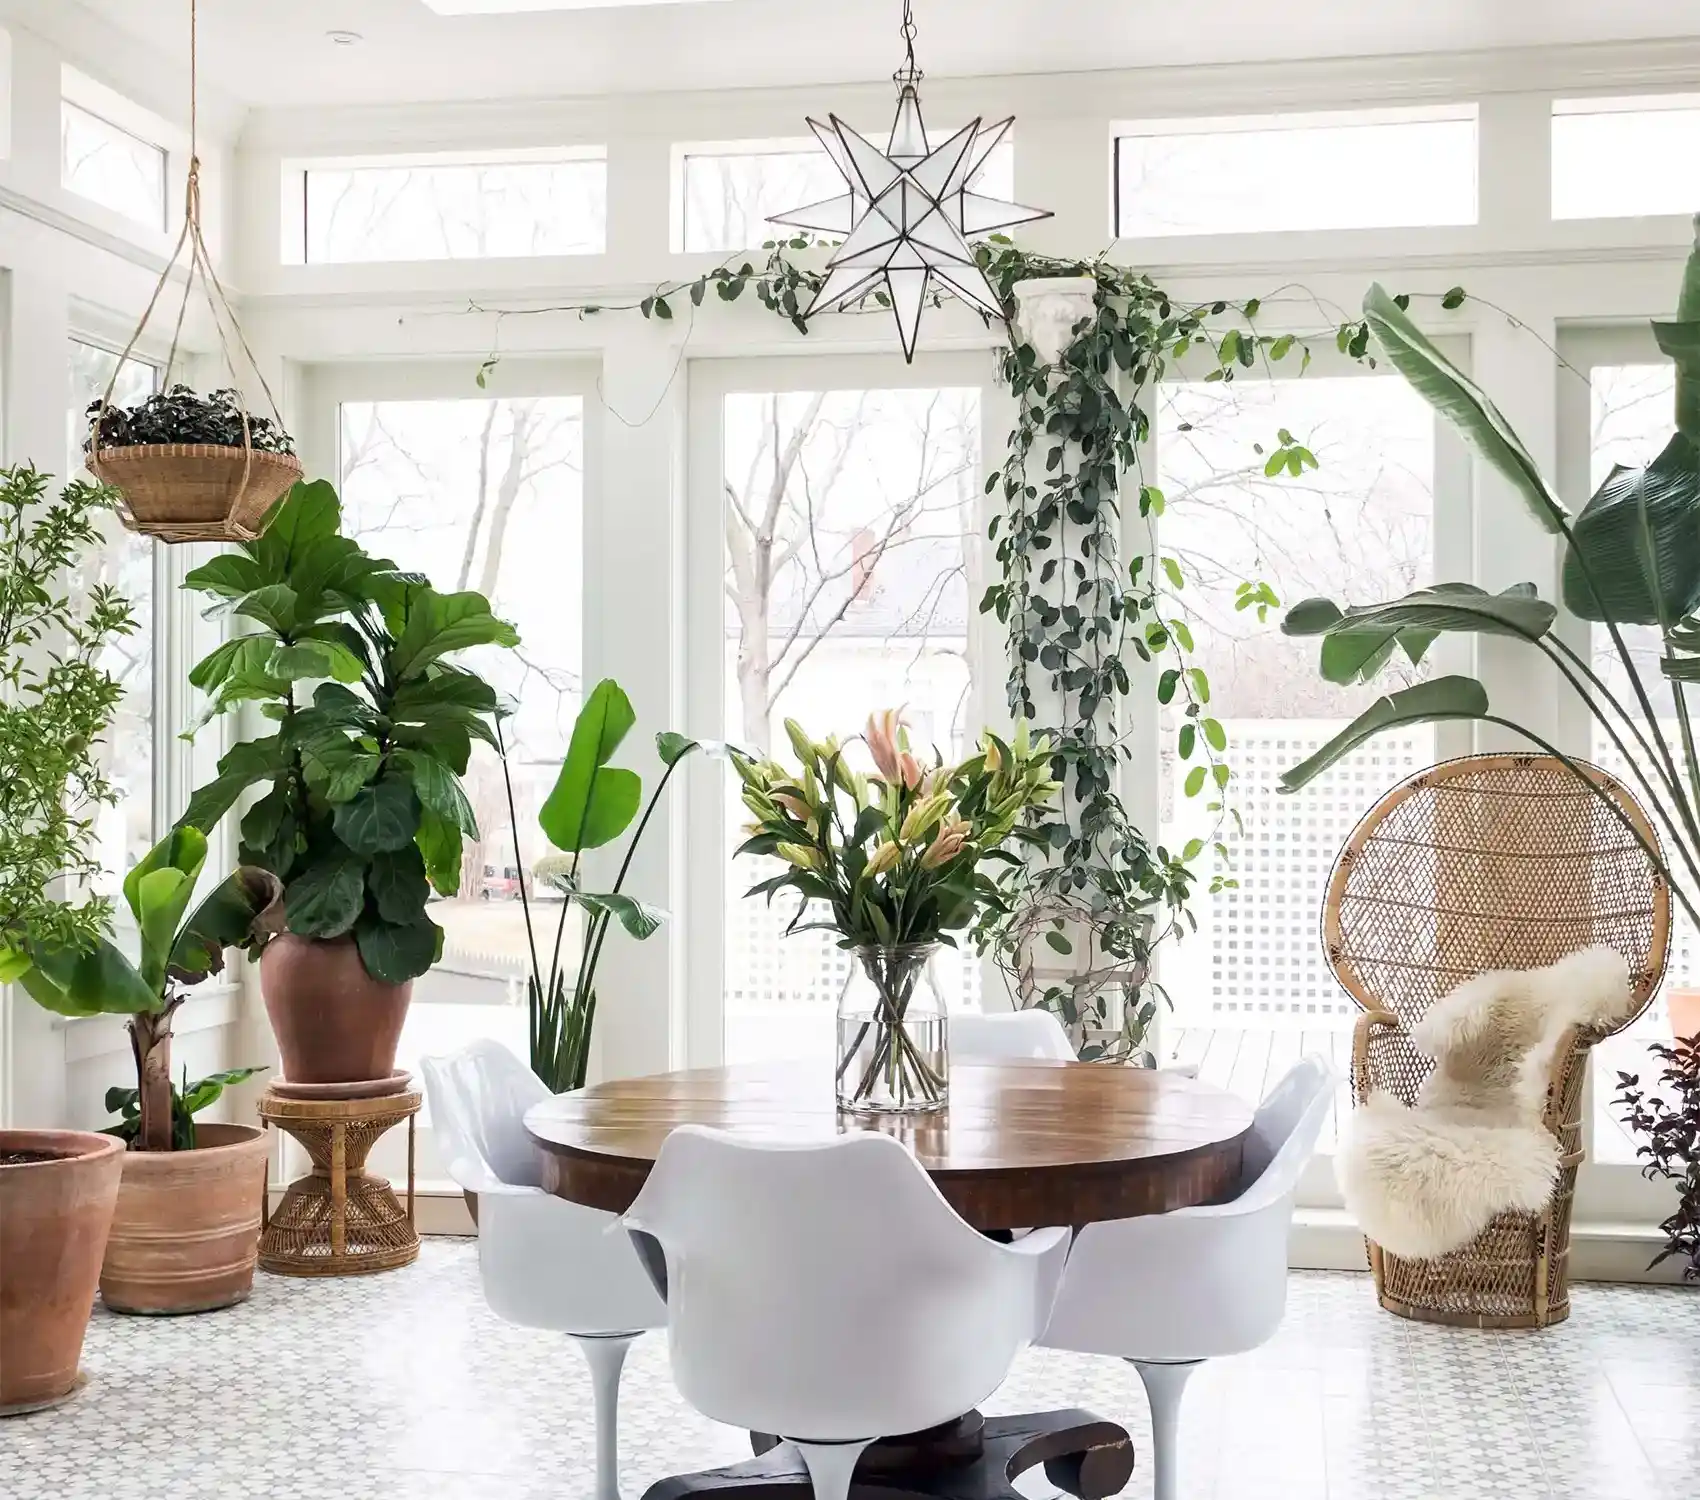 sunroom contractors Deal NJ, white sunroom with huge windows and lots of plants